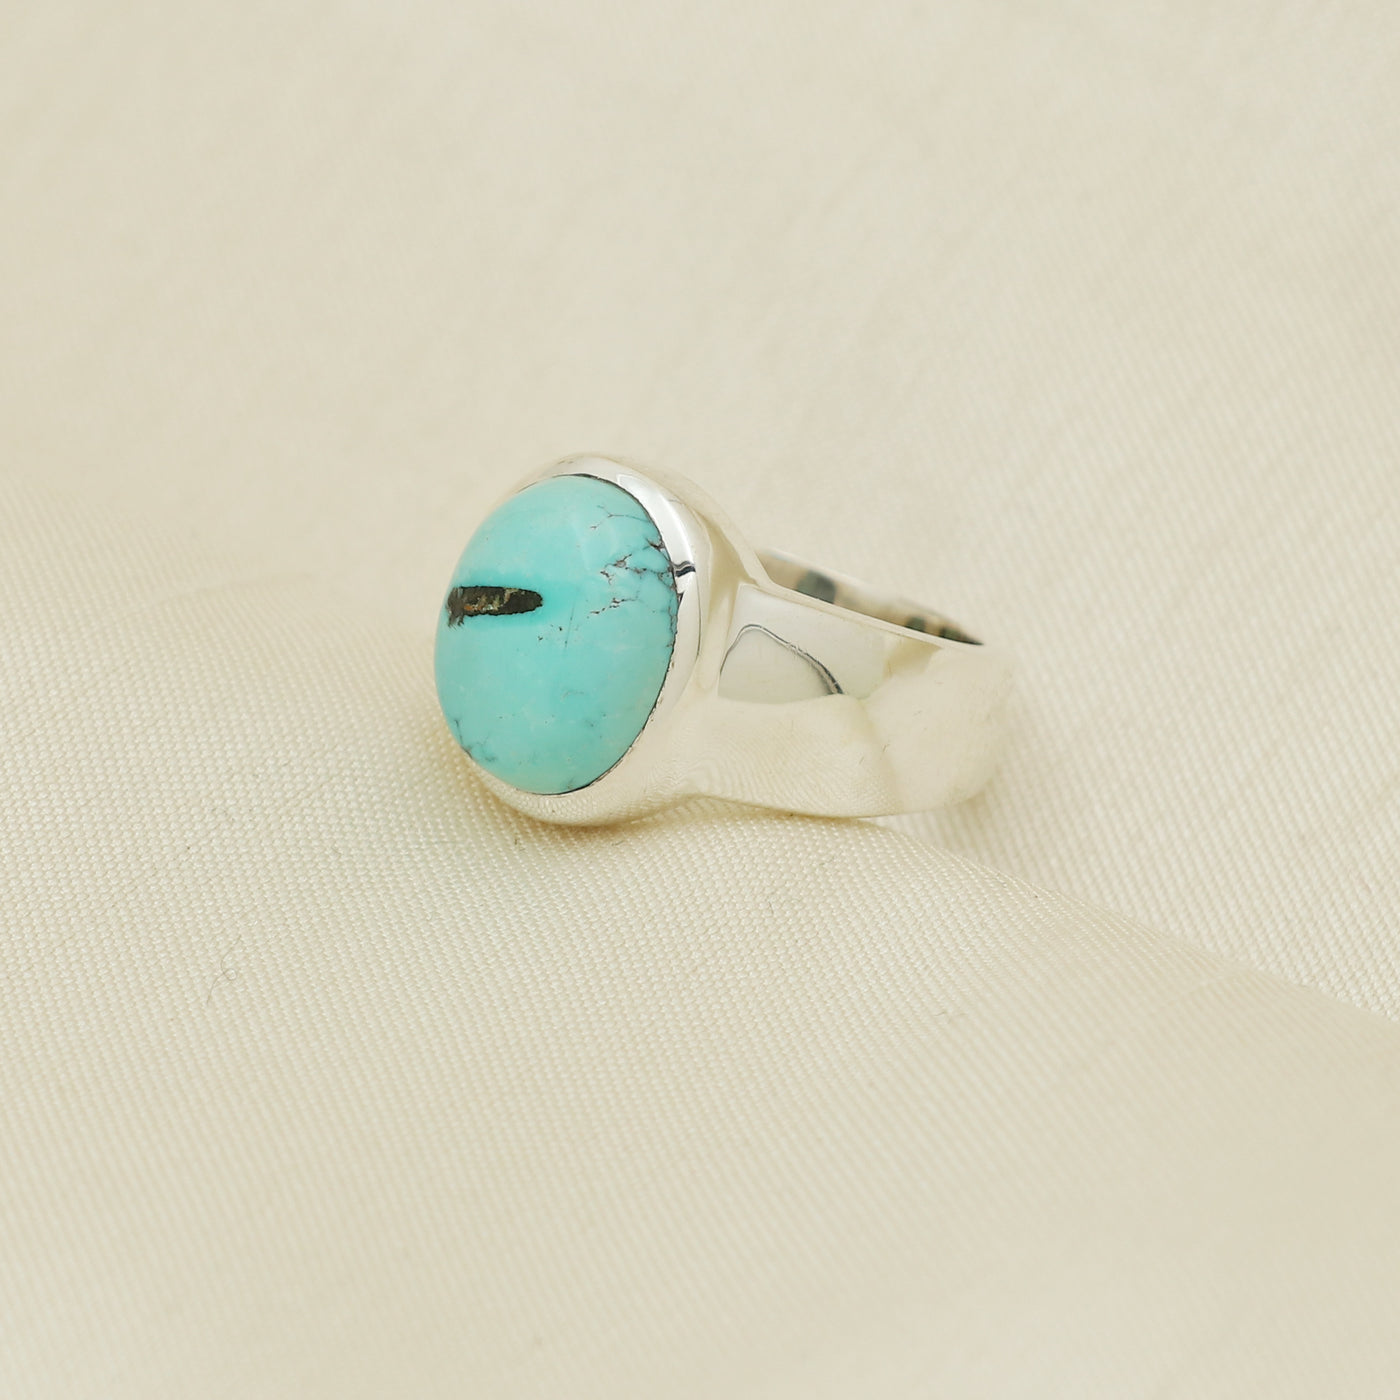 Classic Oval Turquoise Ring